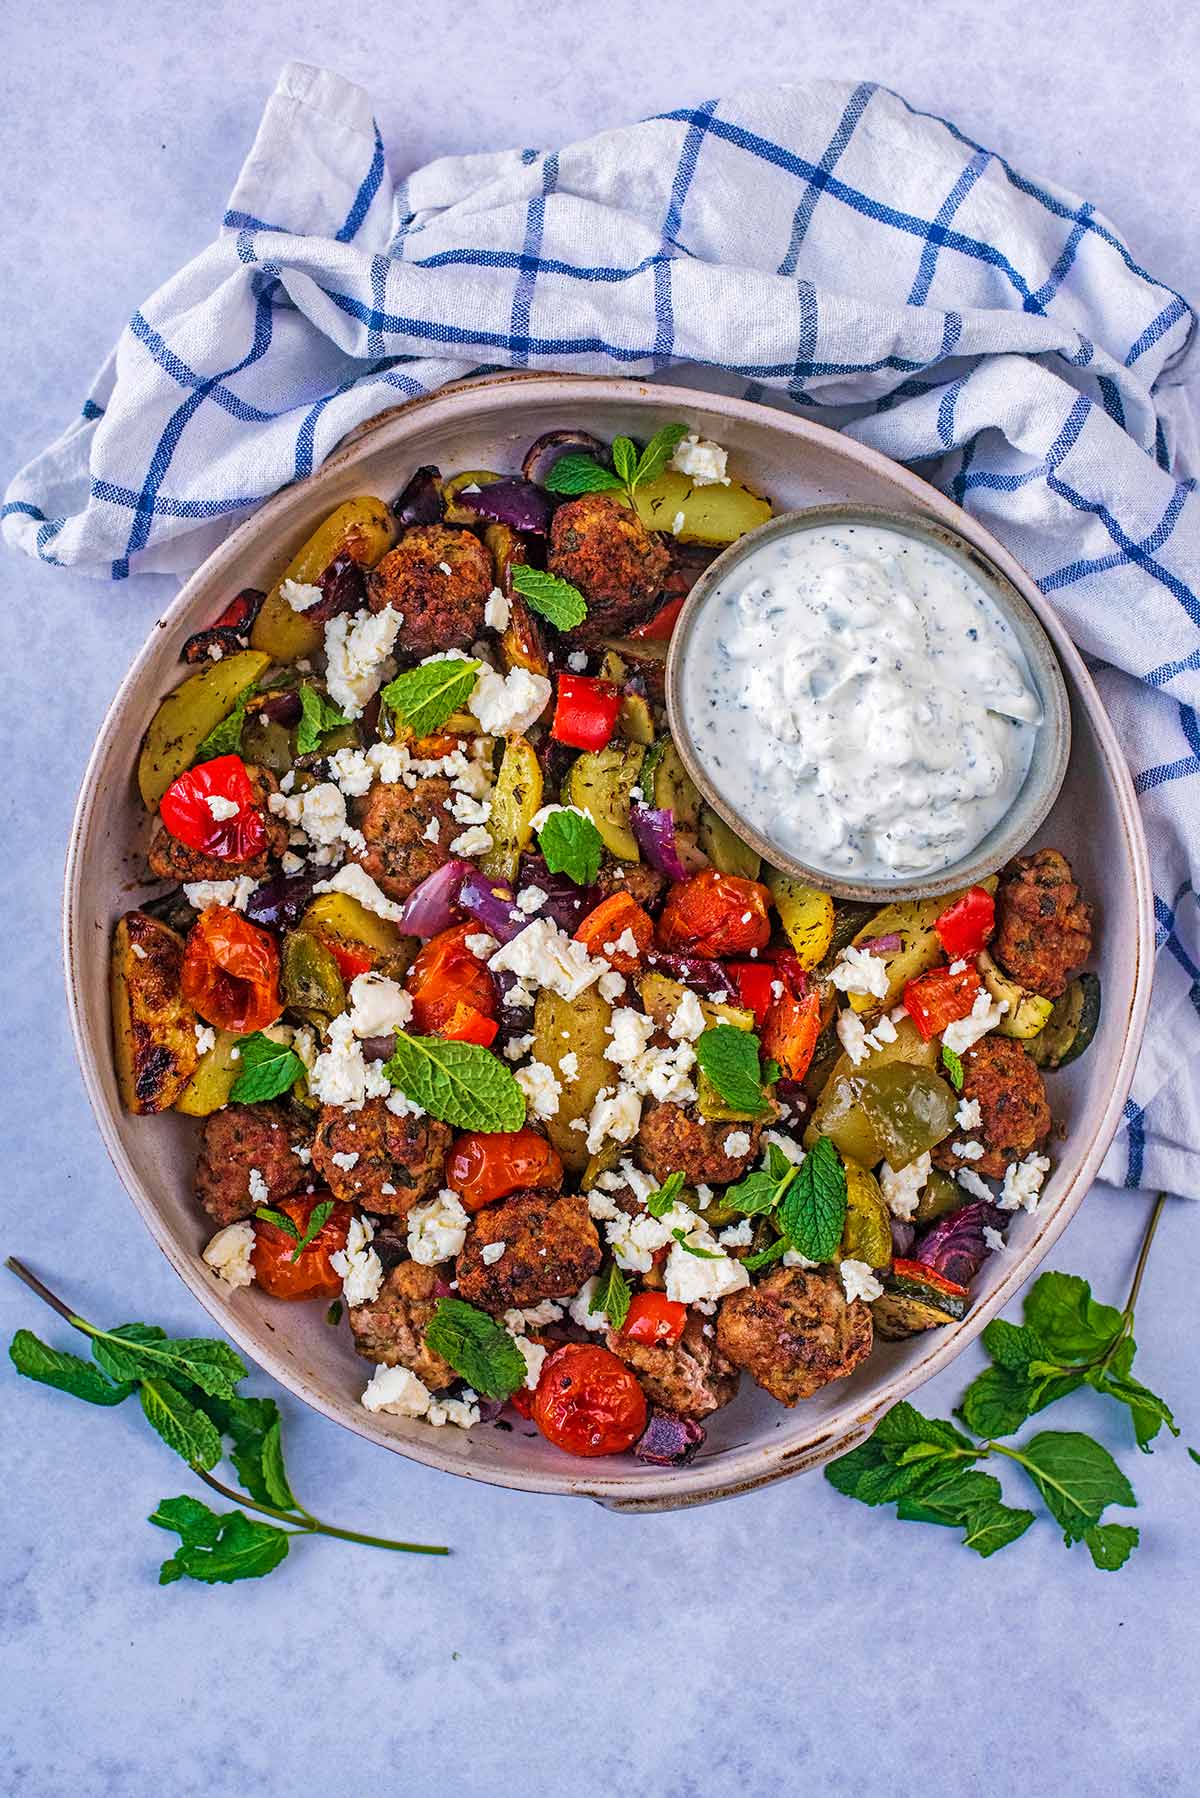 A large serving bowl containing meatballs, cooked vegetables and a small bowl of tzatziki.